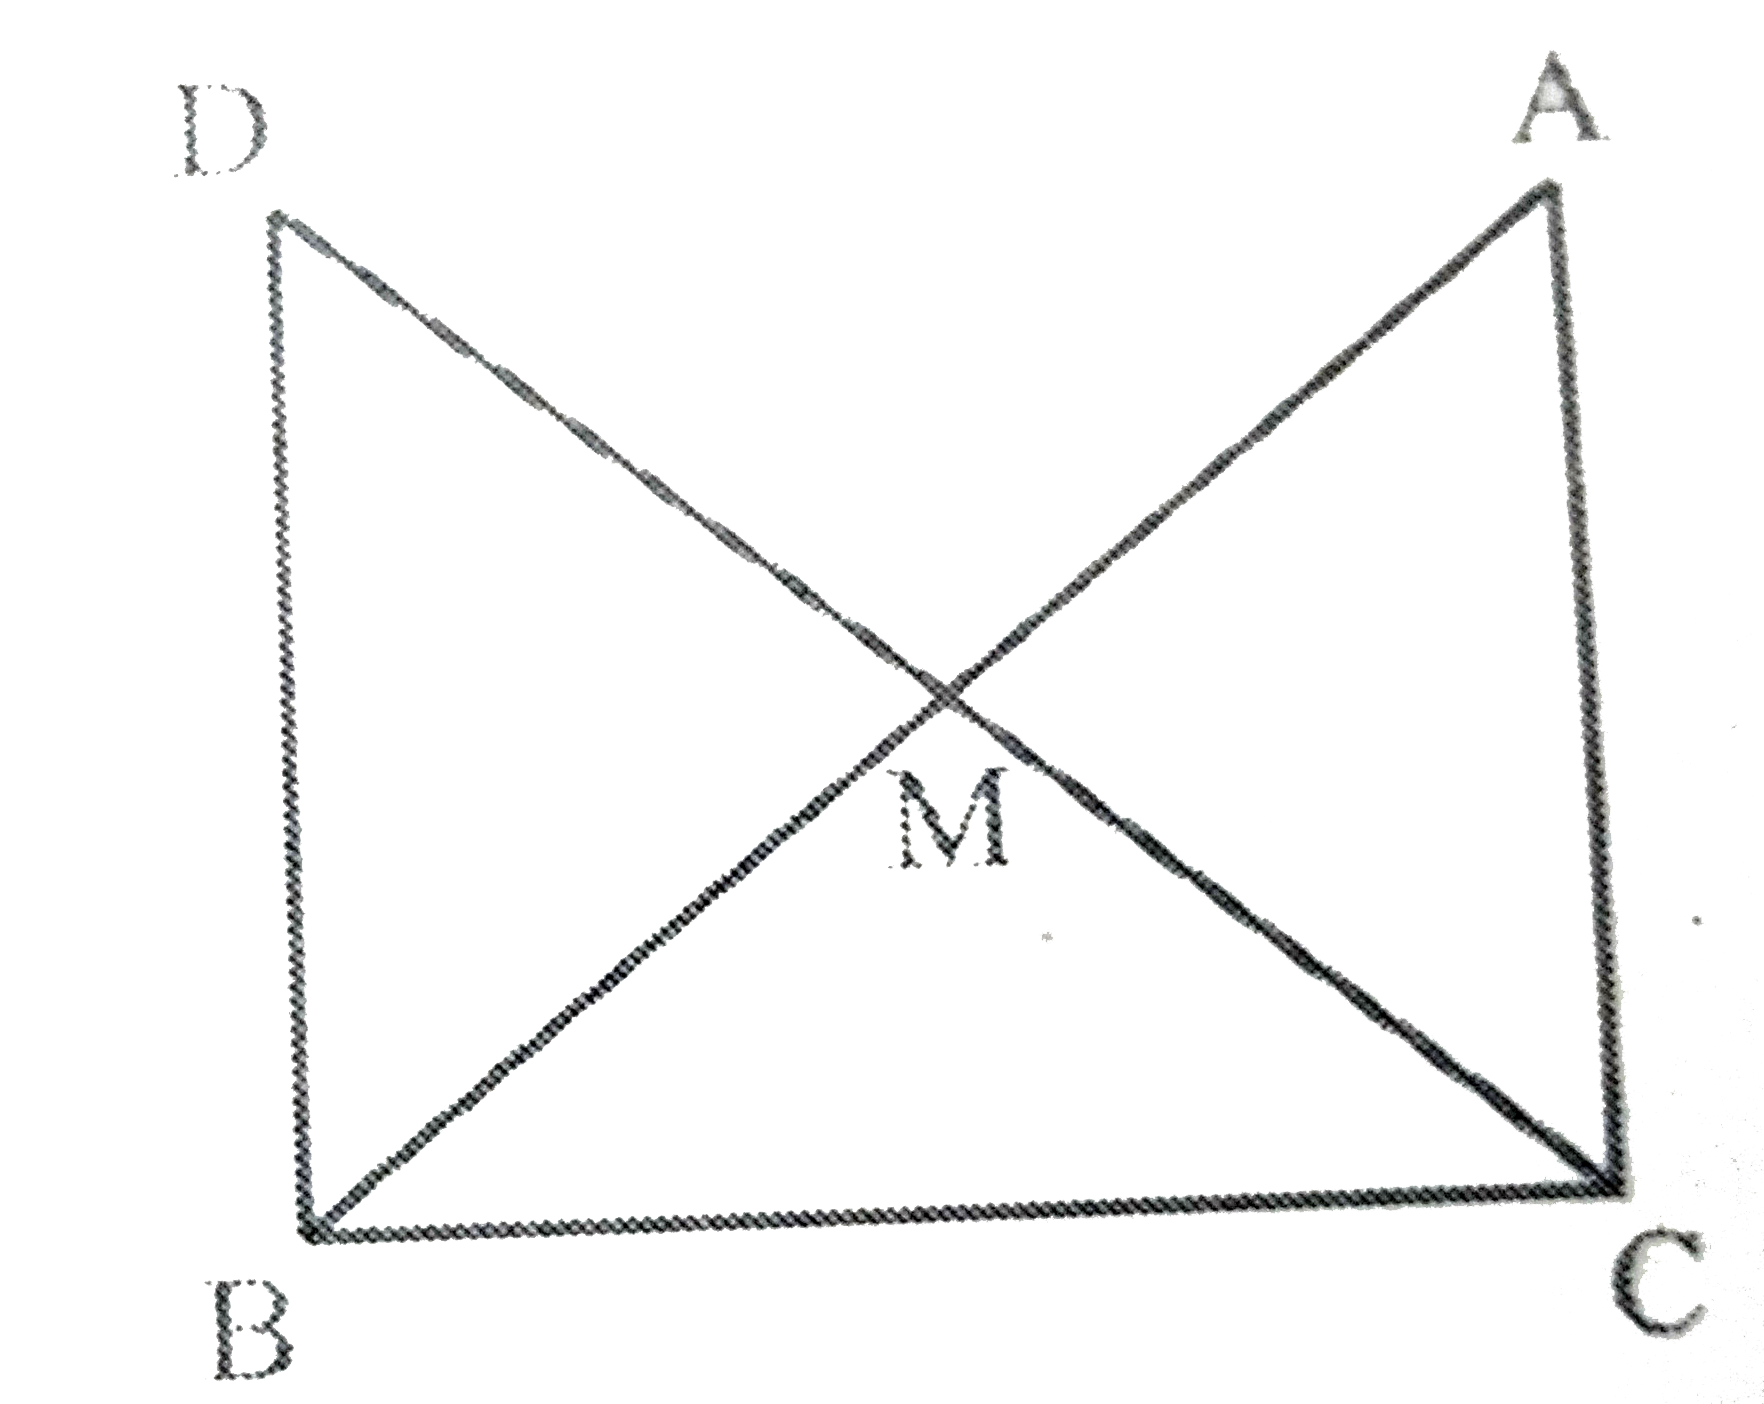 In right triangle ABC, right-angled at C, M is the mid-point of hypotenuse AB. C is joined to M and  produced to a point D such that D M\ =\ C M. Point D is joined to point B (see Fig.  7.23). Show that: (i) DeltaA M C~=DeltaB M D (ii) /DBC is a right angle (iii) Δ DBC ≅ Δ ACB   (iv) CM =1/2 AB